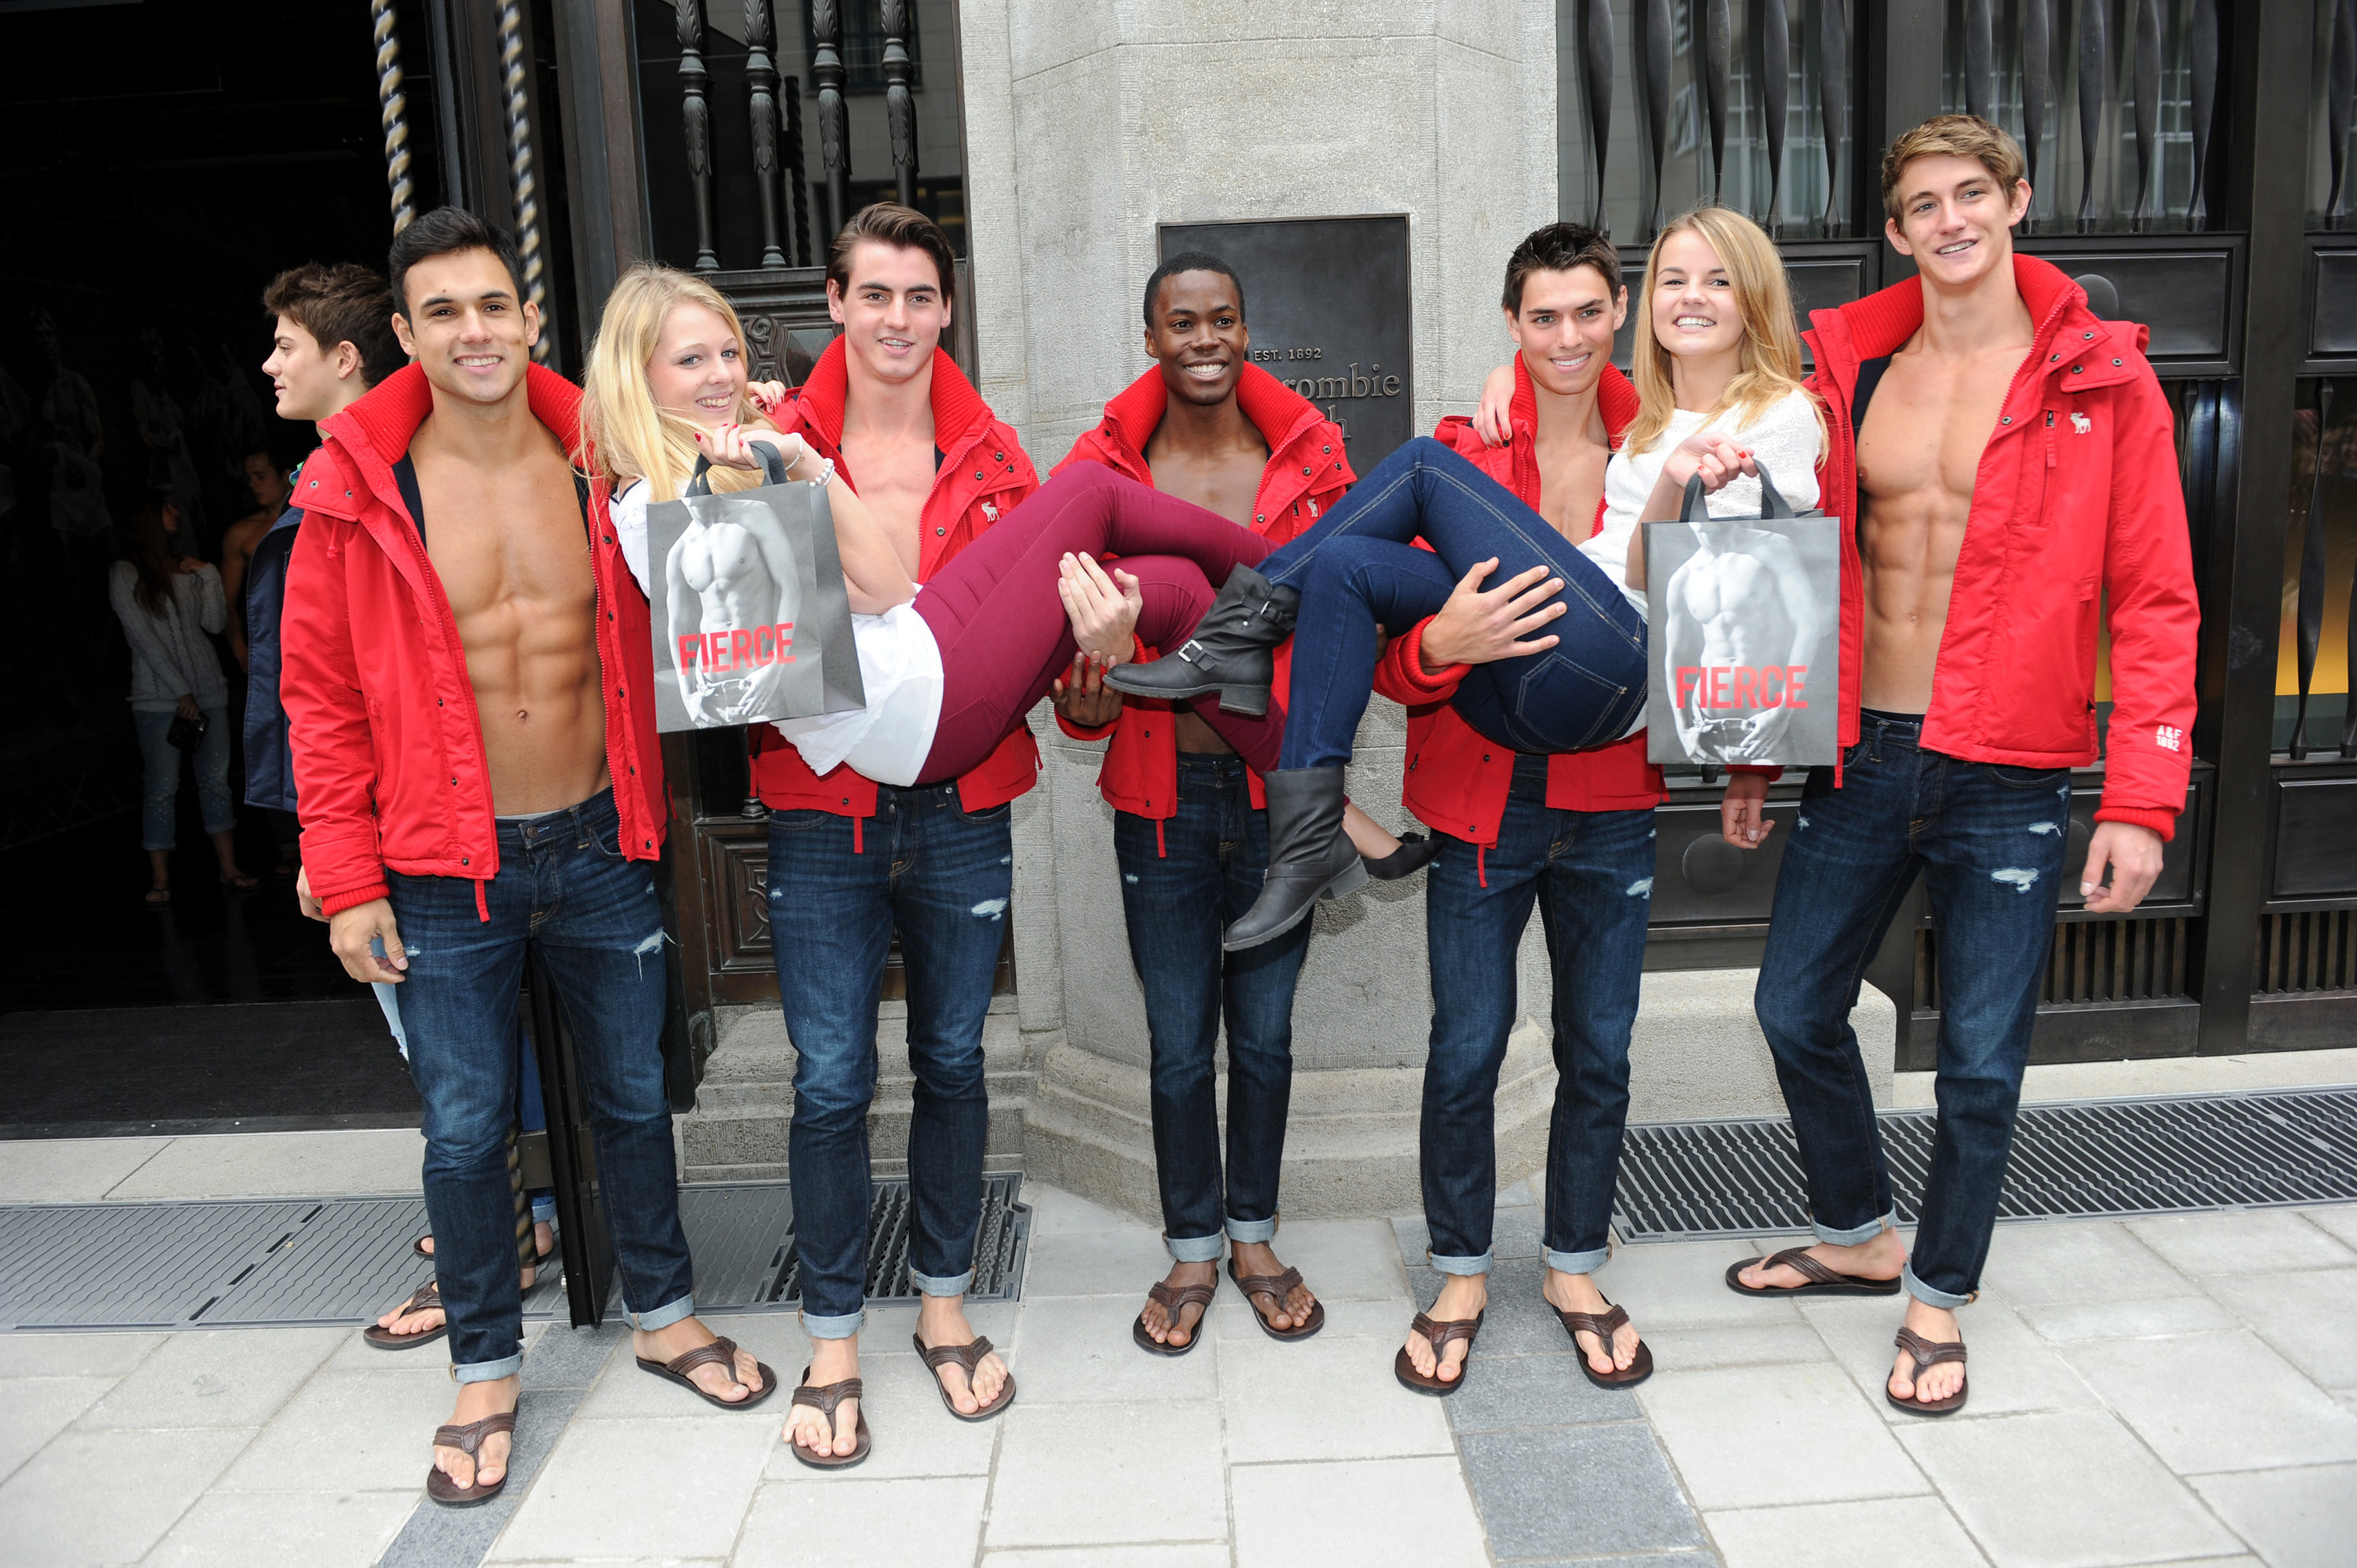 Five Abercrombie and Fitch Models hold up two women outside an Abercrombie and Fitch store